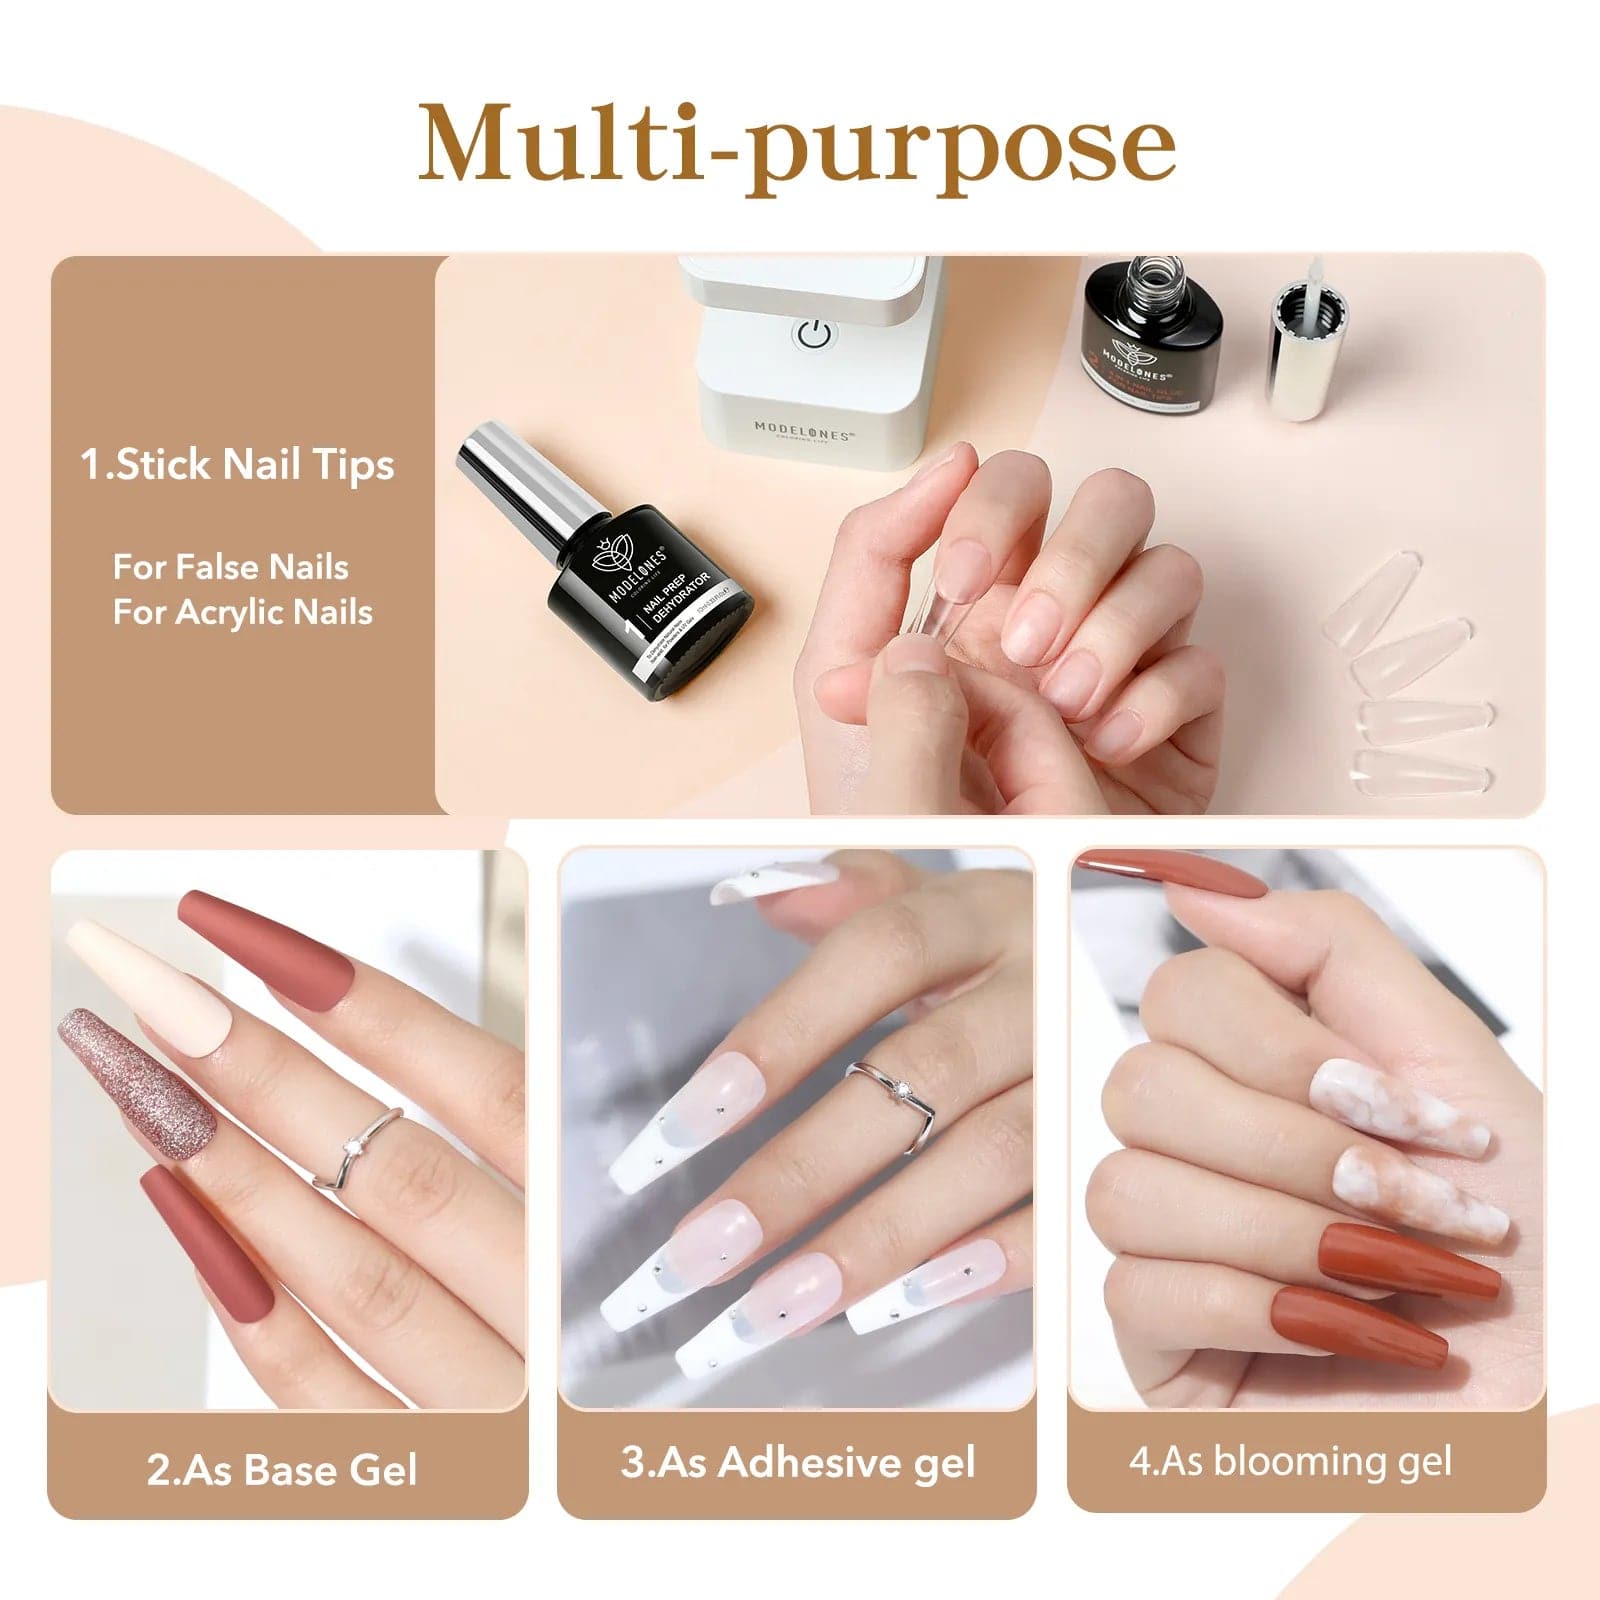 4-In-1 Multi-Functional Nail Glue Gel Nail Extension Enhancement Set【US ONLY】